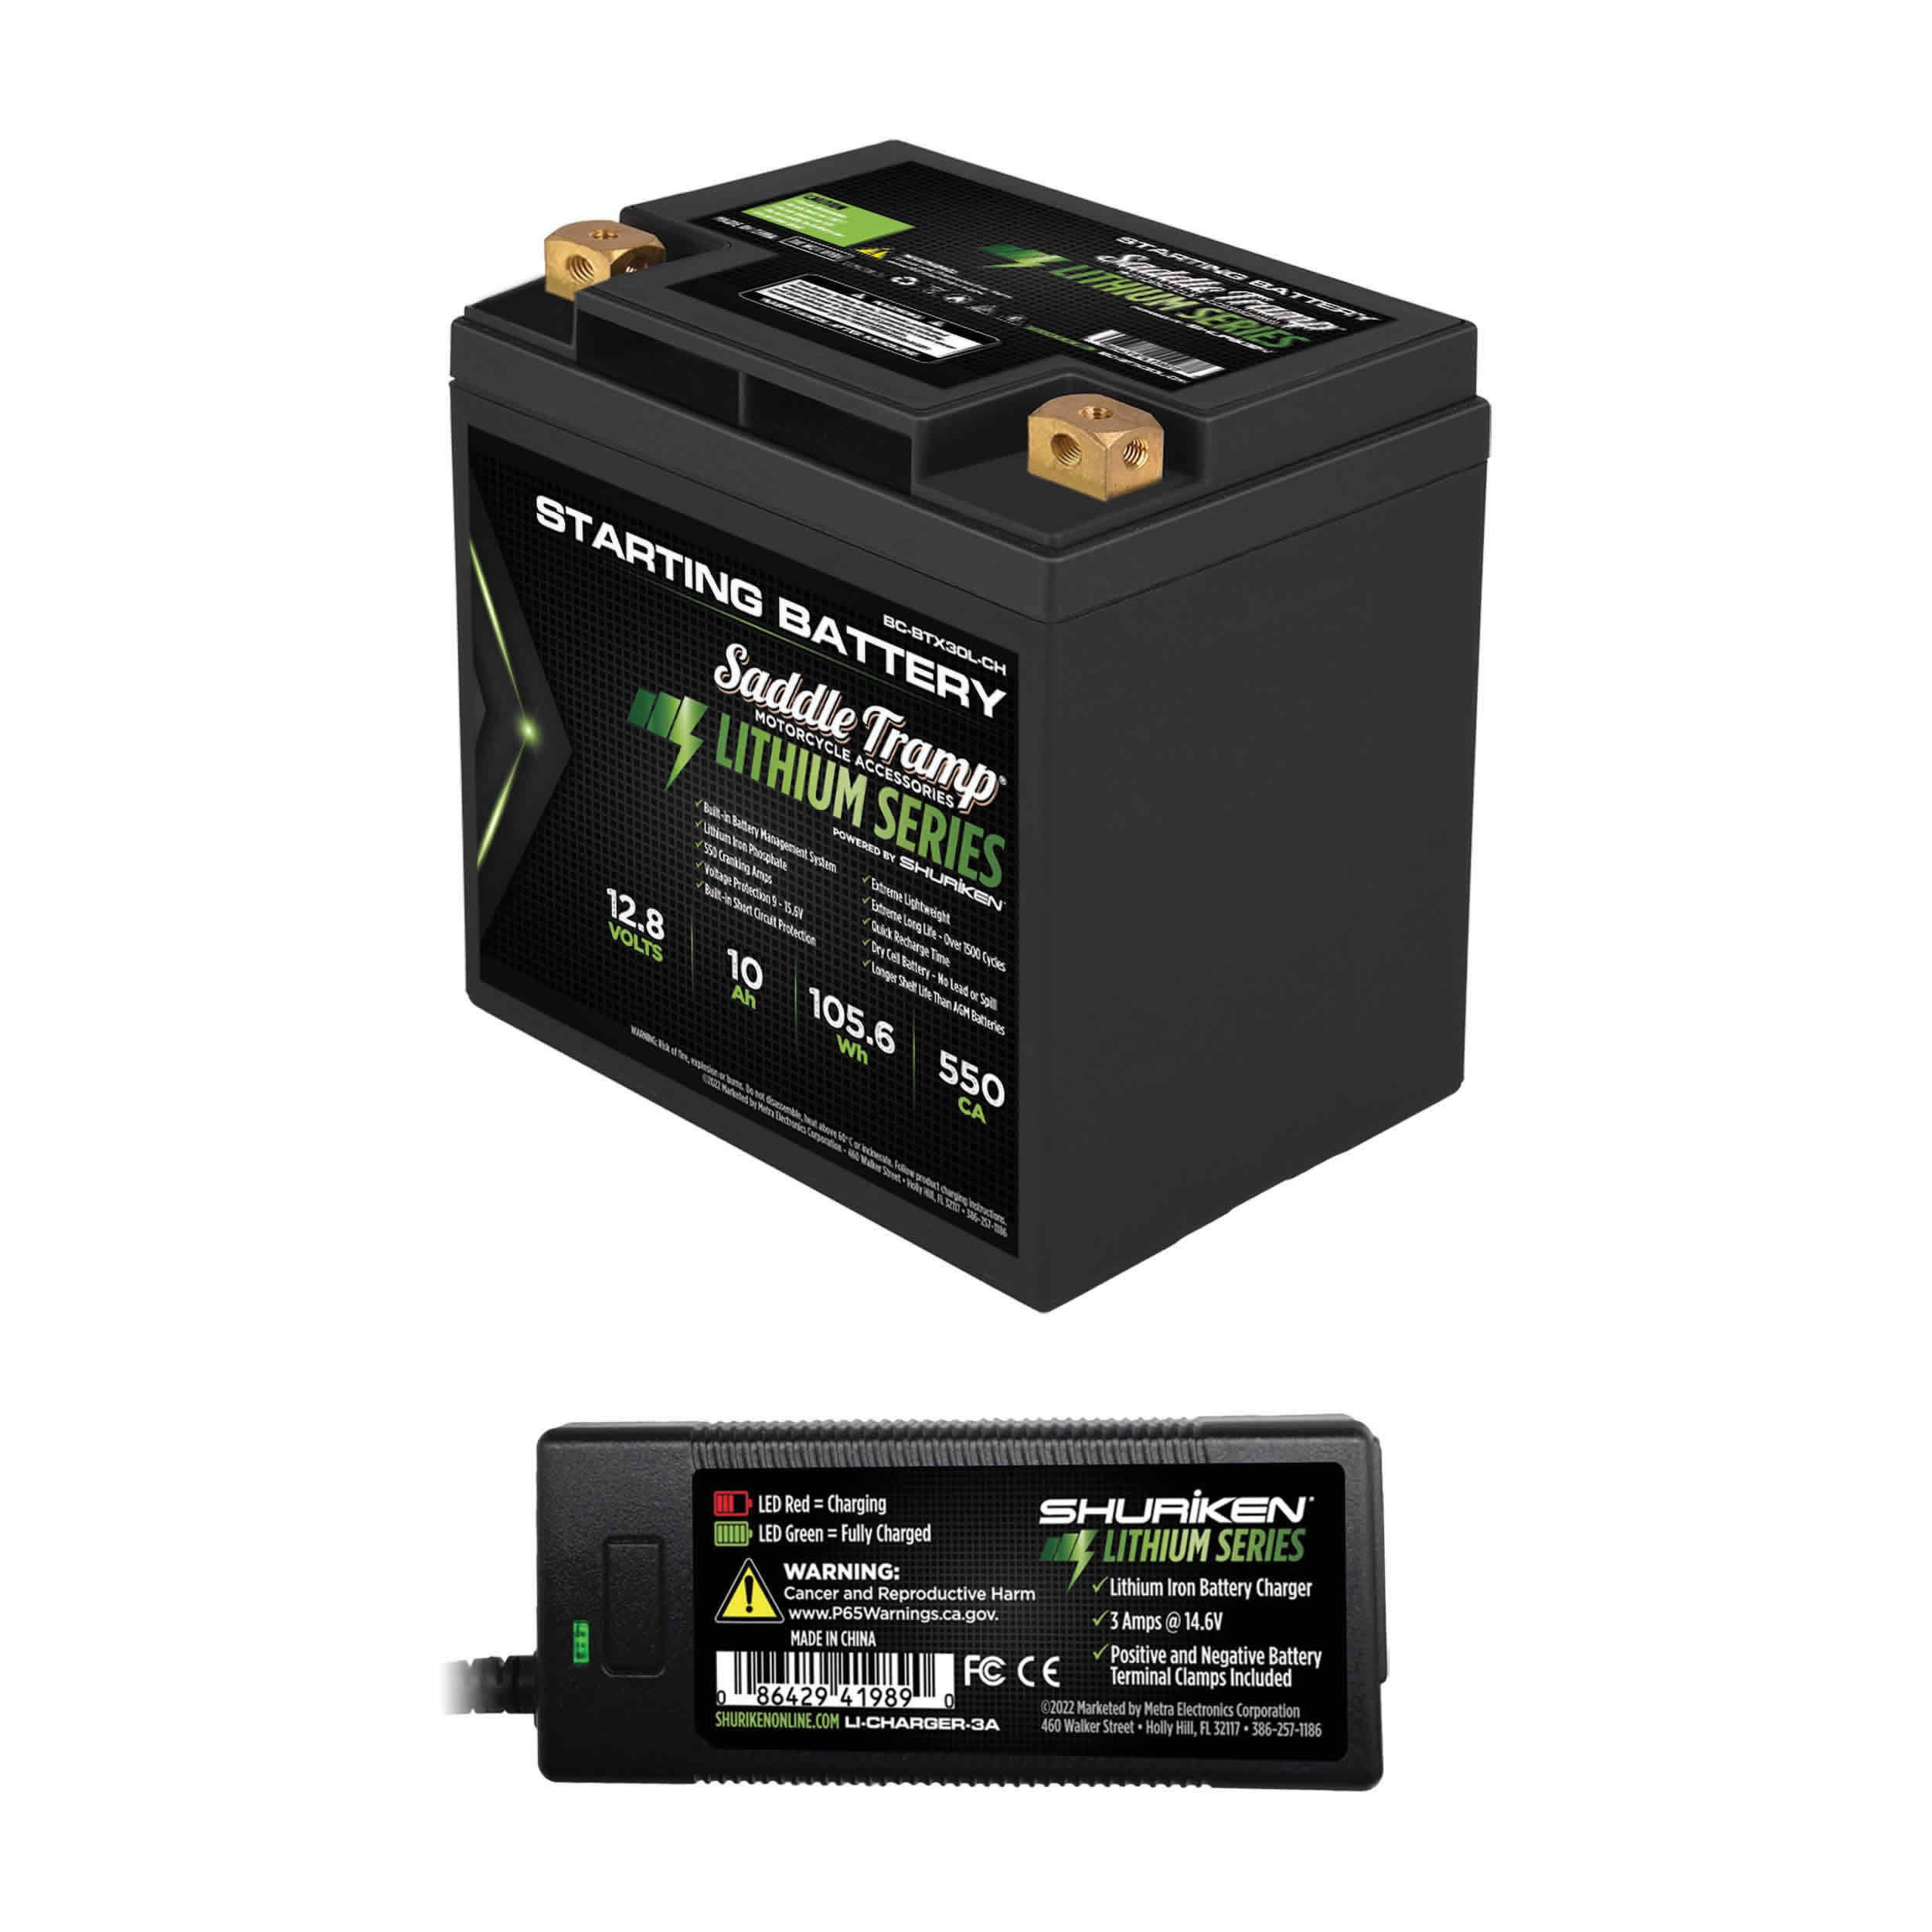 550CA/10.15AH Lithium-Ion Starting Battery with Charger